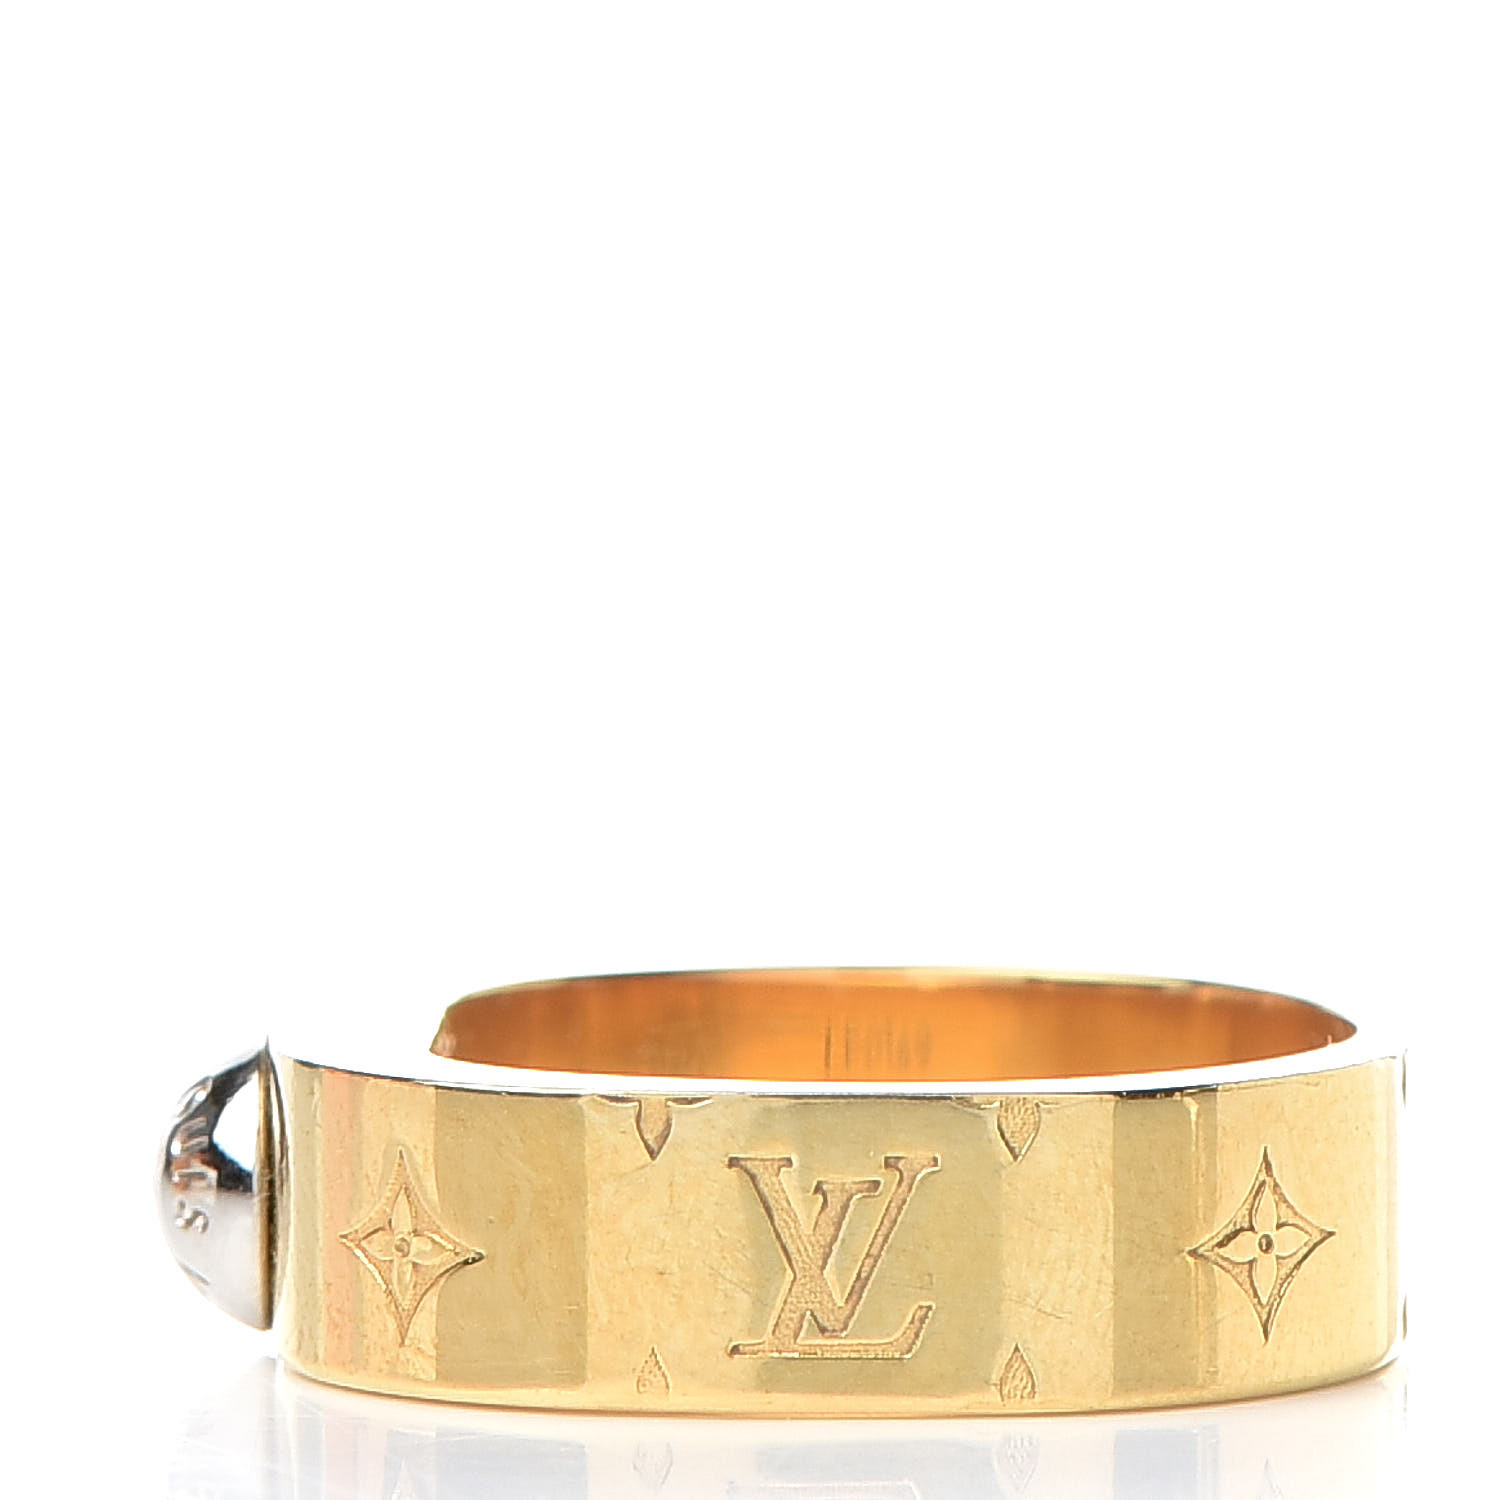 Alphabet lv&me ring Louis Vuitton Gold size 50 EU in Gold plated - 16116887